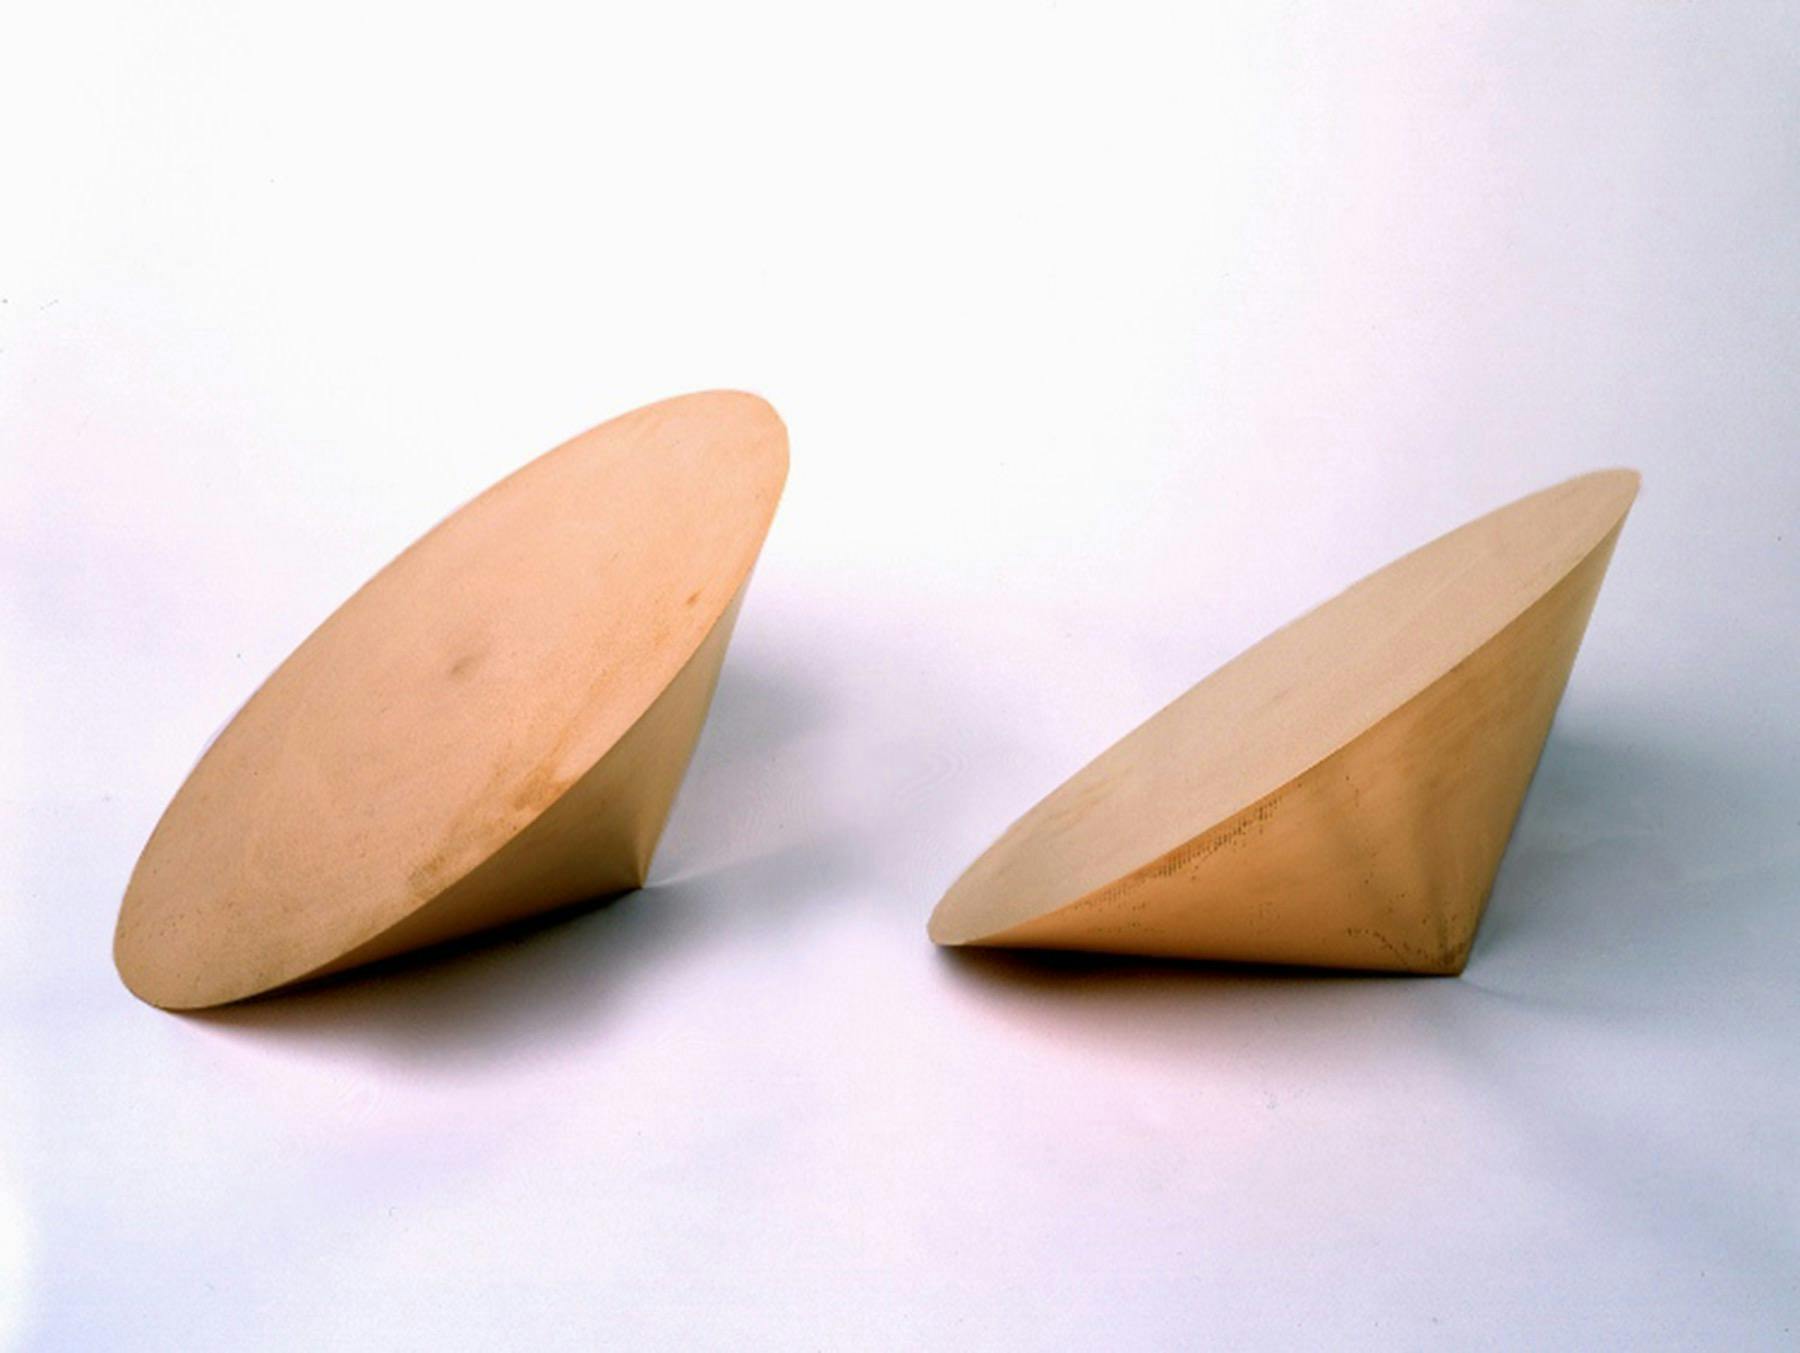 Roni Horn, Pair Object, 1990